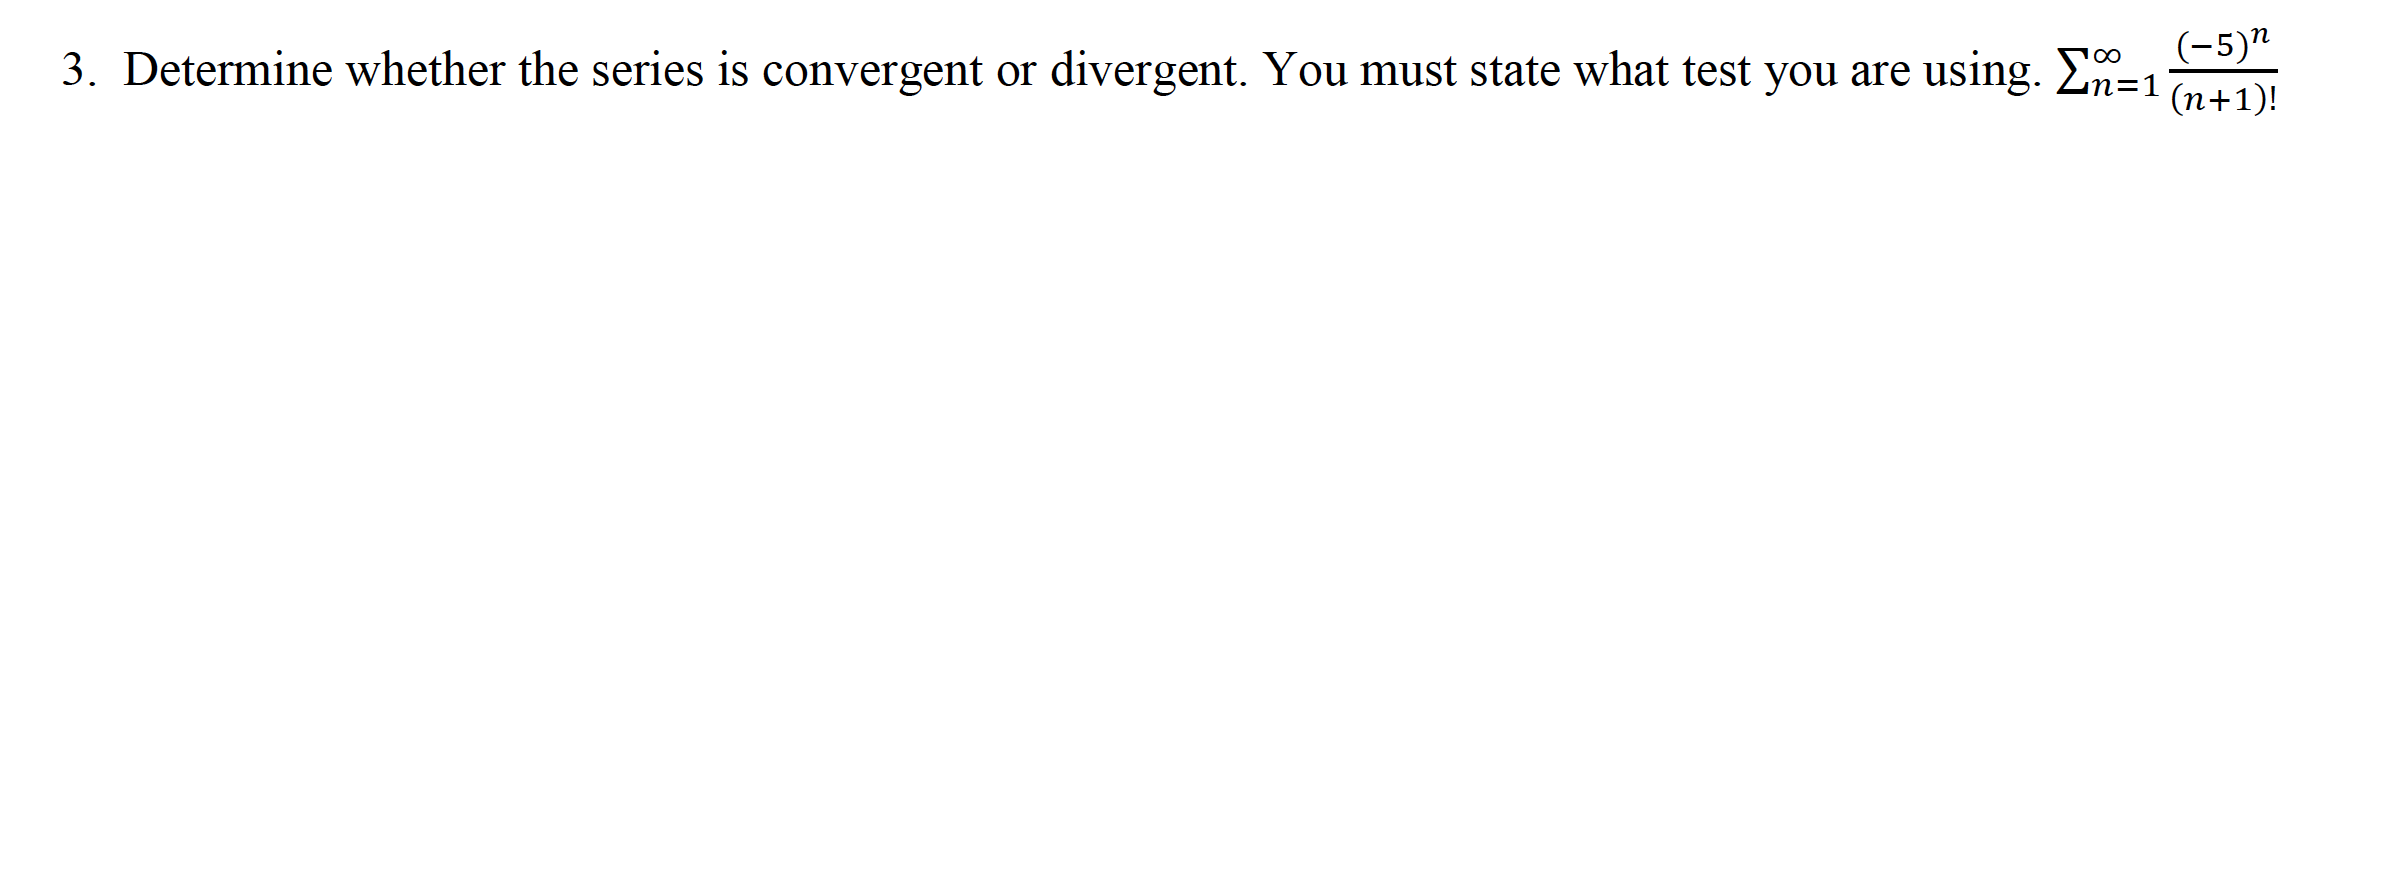 (-5)"
3. Determine whether the series is convergent or divergent. You must state what test you are using. En=1
(n+1)!
